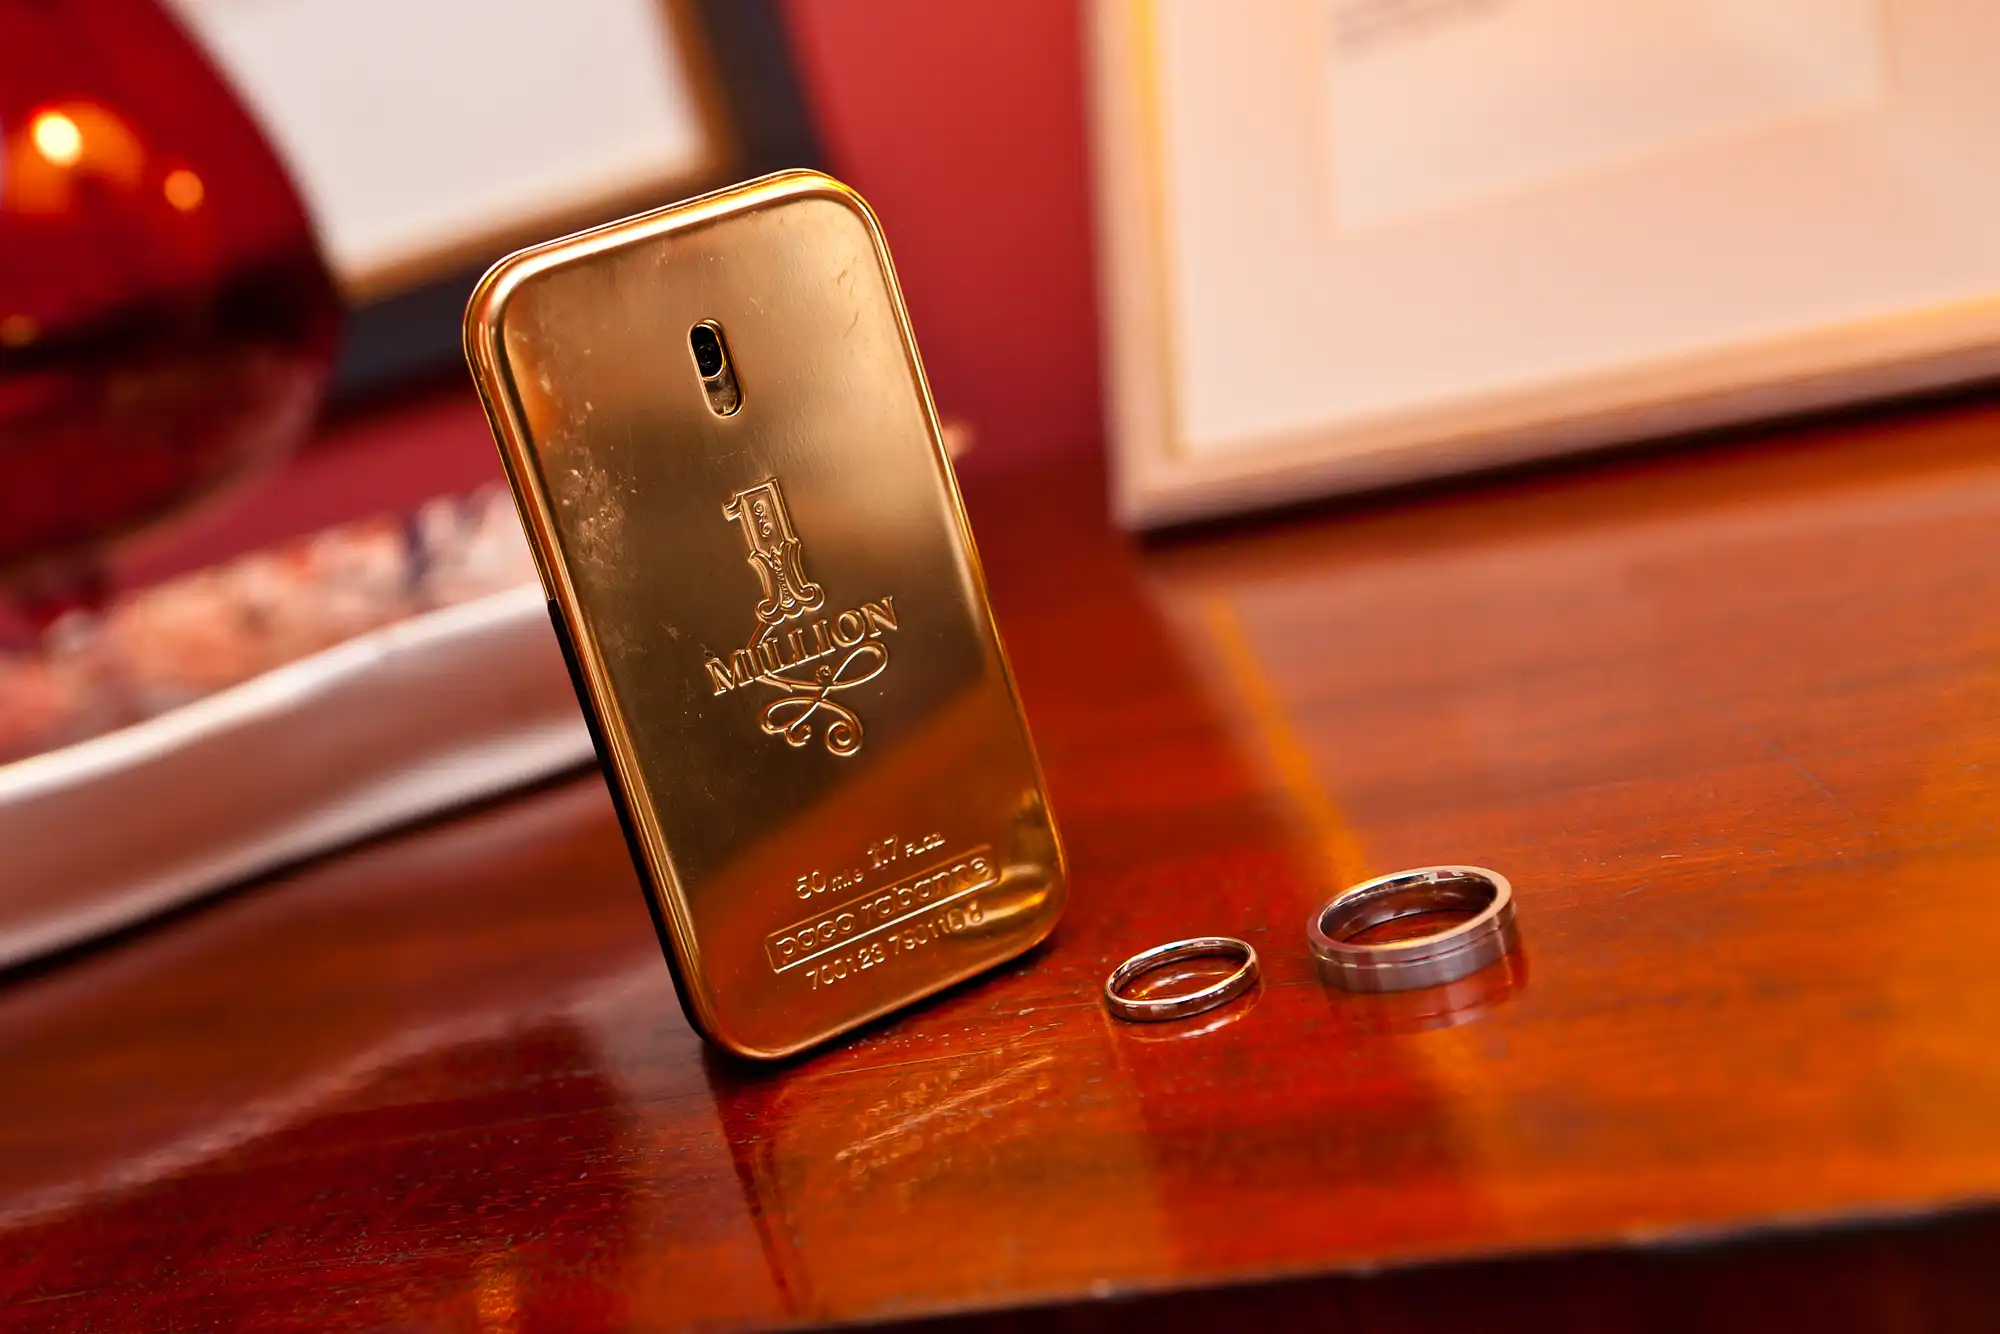 A golden cologne bottle and two wedding rings placed on a wooden surface.